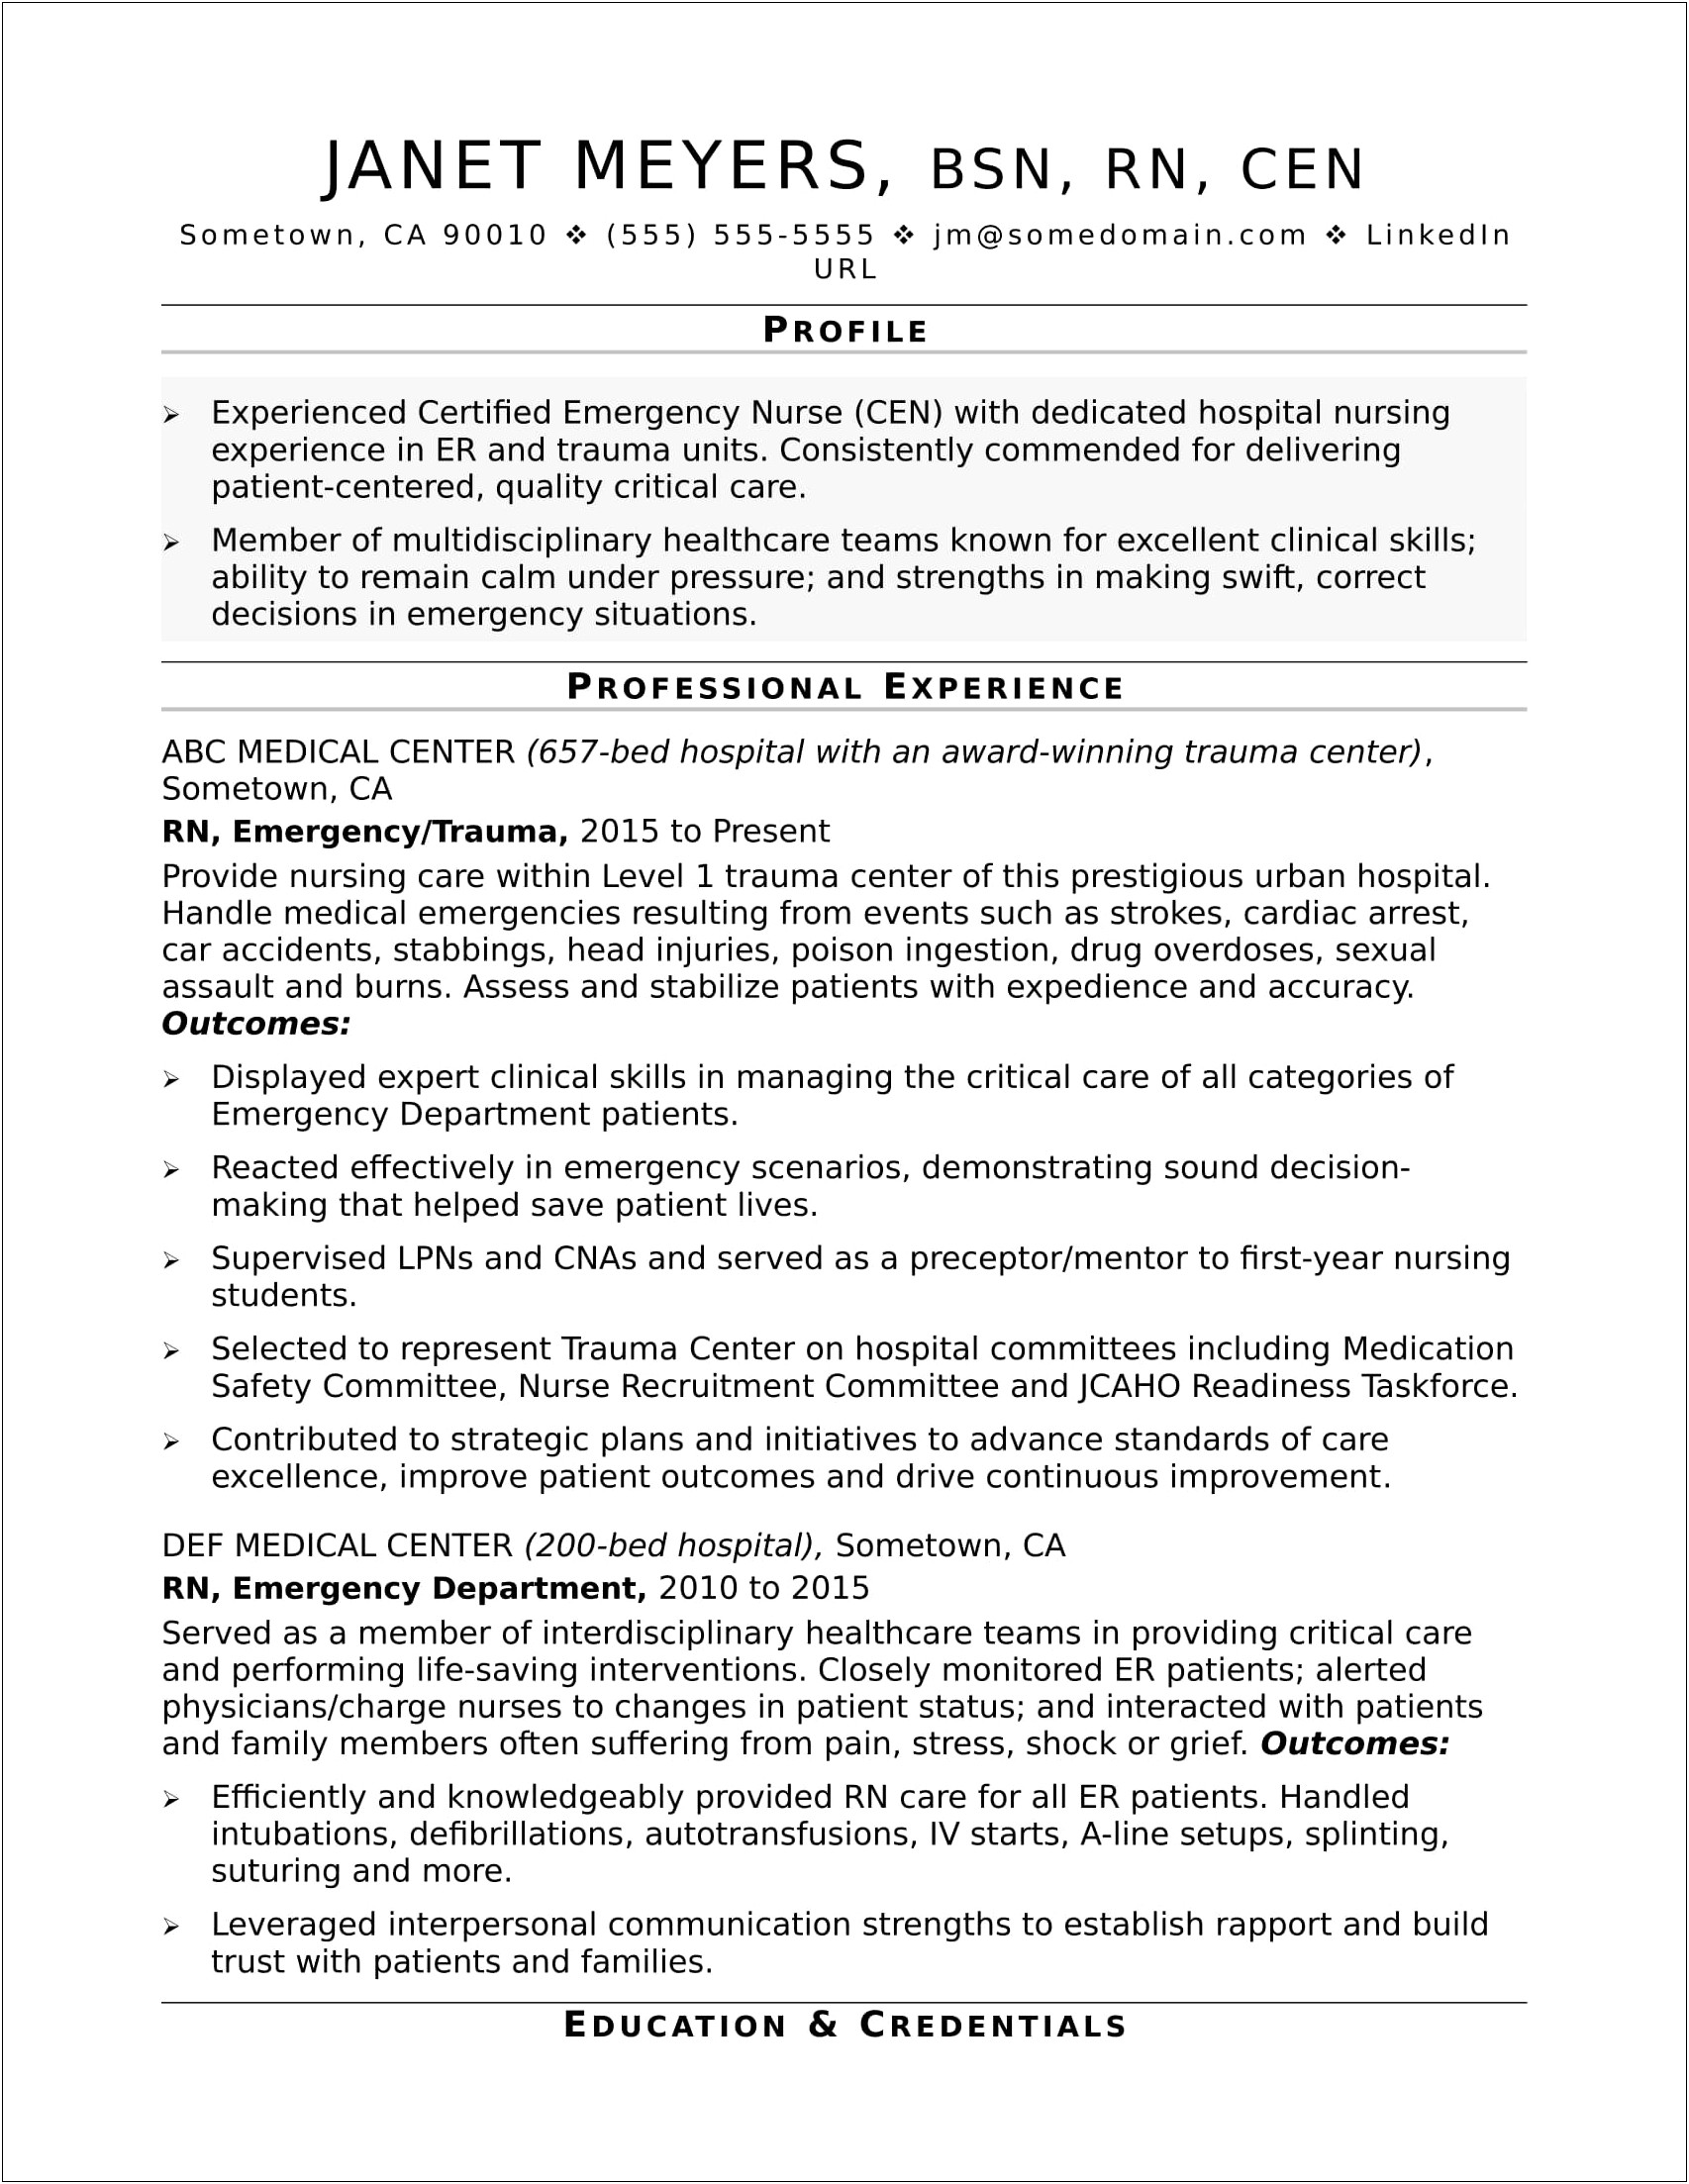 Nursing Clinical Experience Resume Examples